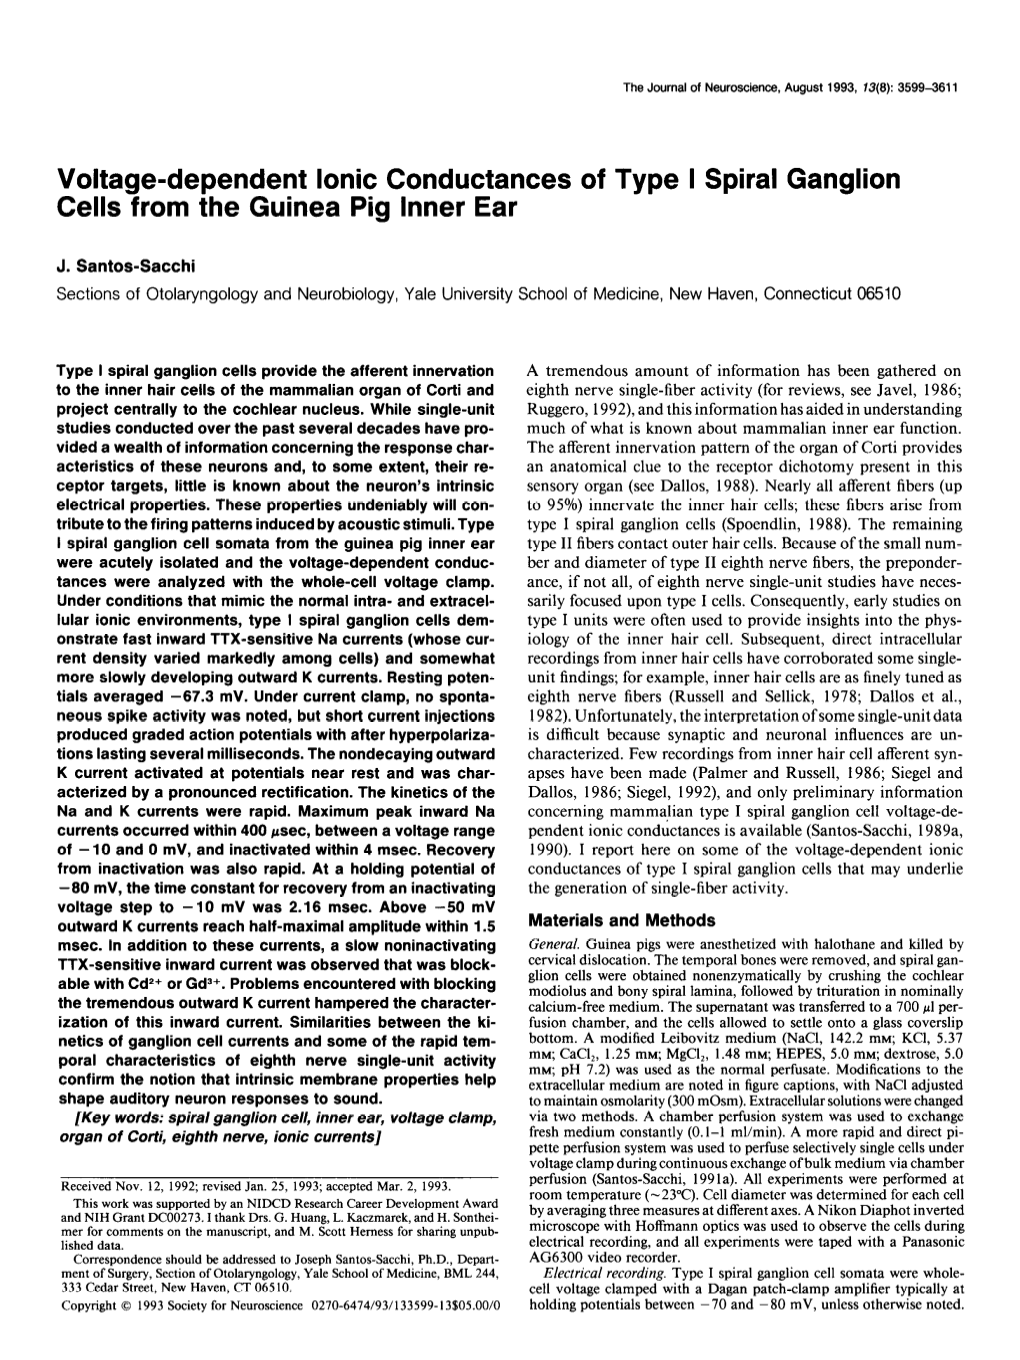 Voltage-Dependent Ionic Conductances of Type I Spiral Ganglion Cells from the Guinea Pig Inner Ear